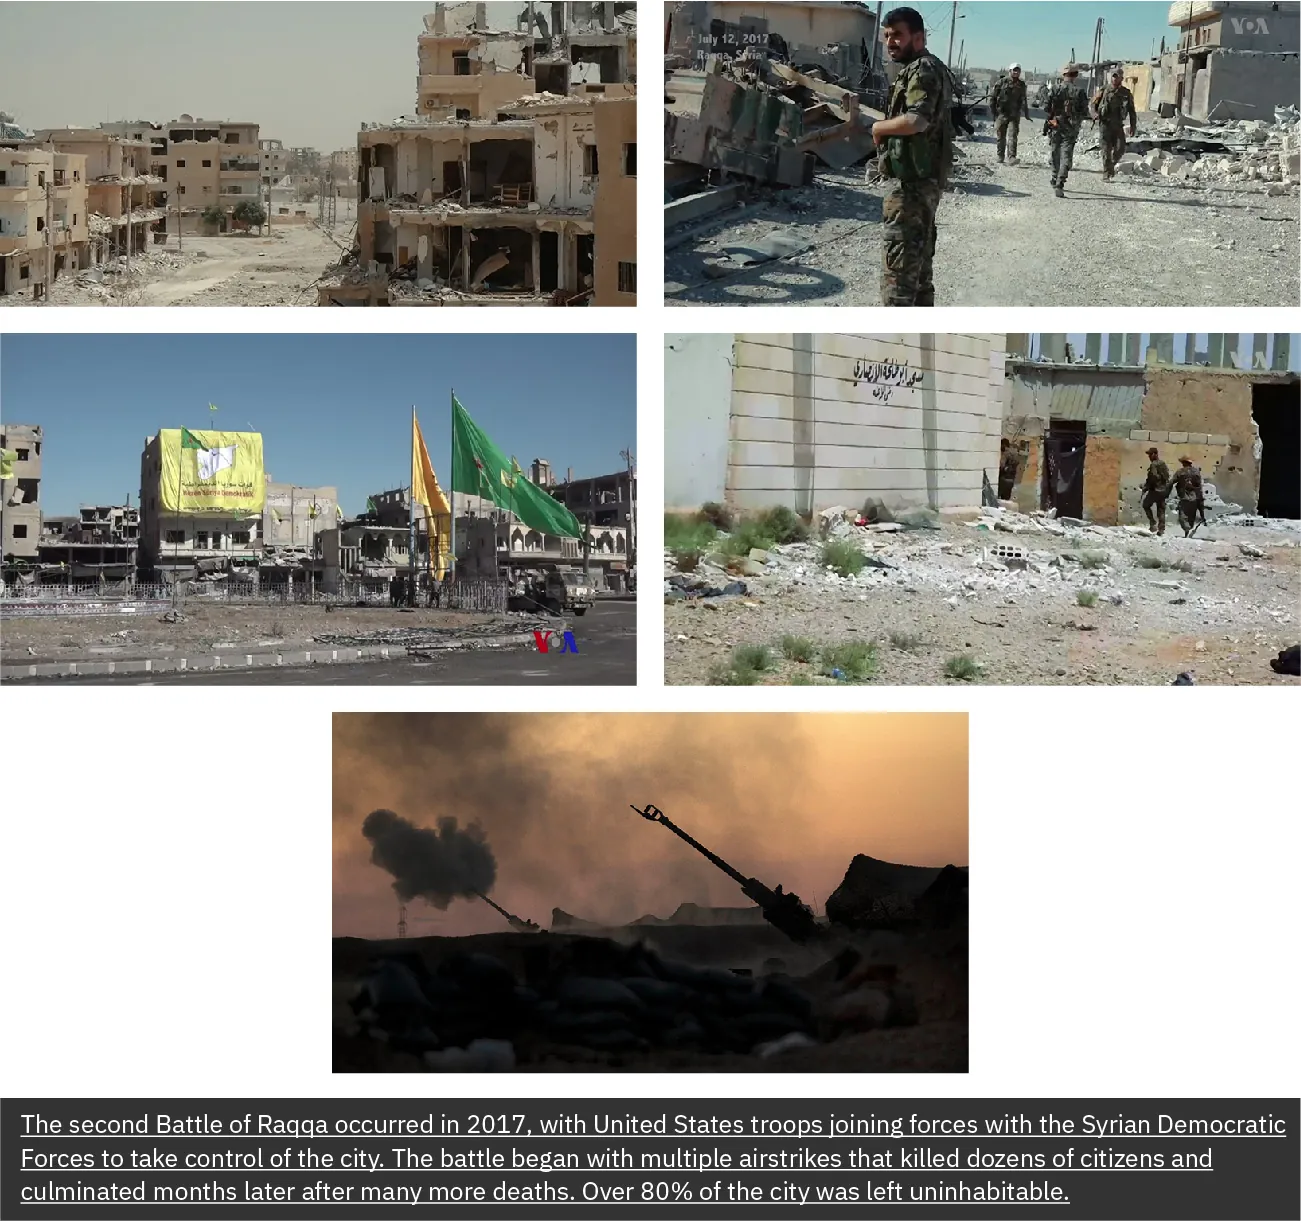 A photo essay includes five different images of destruction caused by the Syrian War. The first image displays buildings damaged in airstrikes. The second image shows soldiers holding guns. The third image shows damaged buildings with the troops flying their flags in victory. The fourth image shows a destroyed building surrounded by soldiers, and the fifth image shows artillery guns during the Battle of Raqqa, 2017.